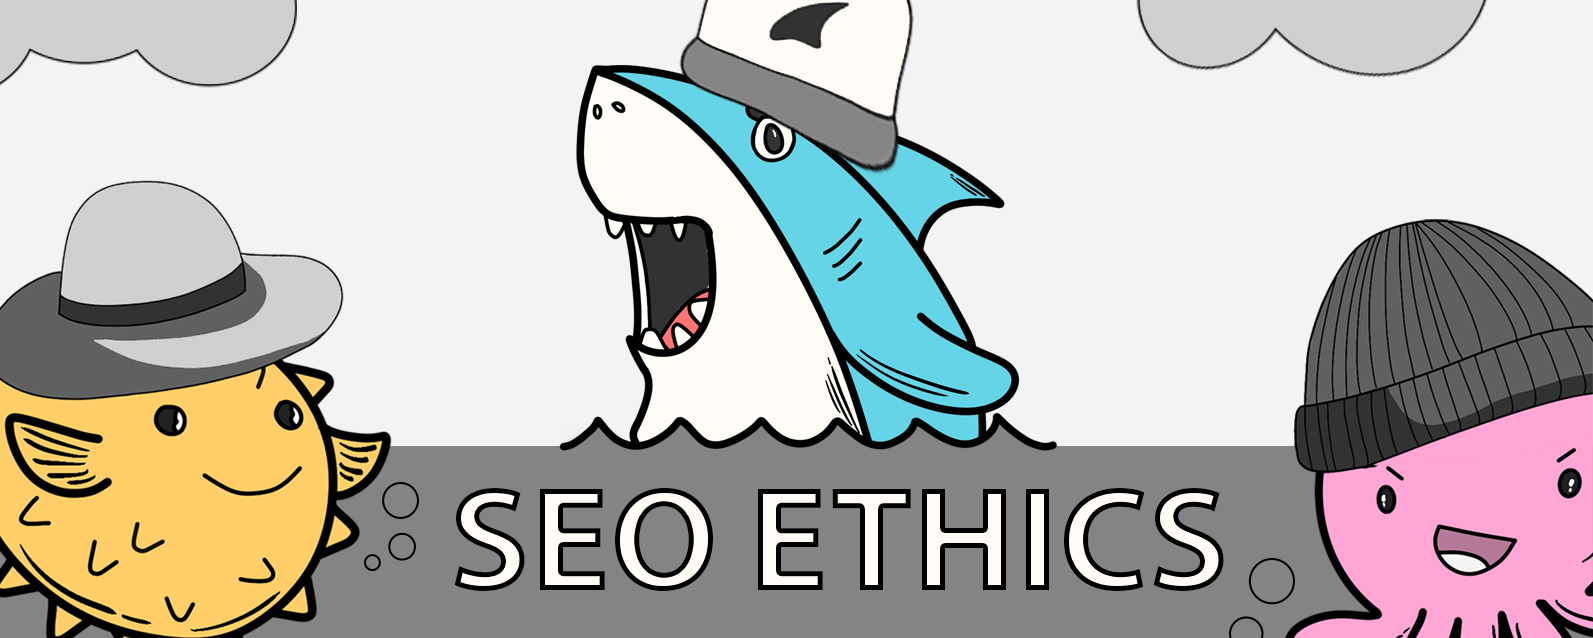 Black, Grey, and White Hat SEO Ethics for the Information Age